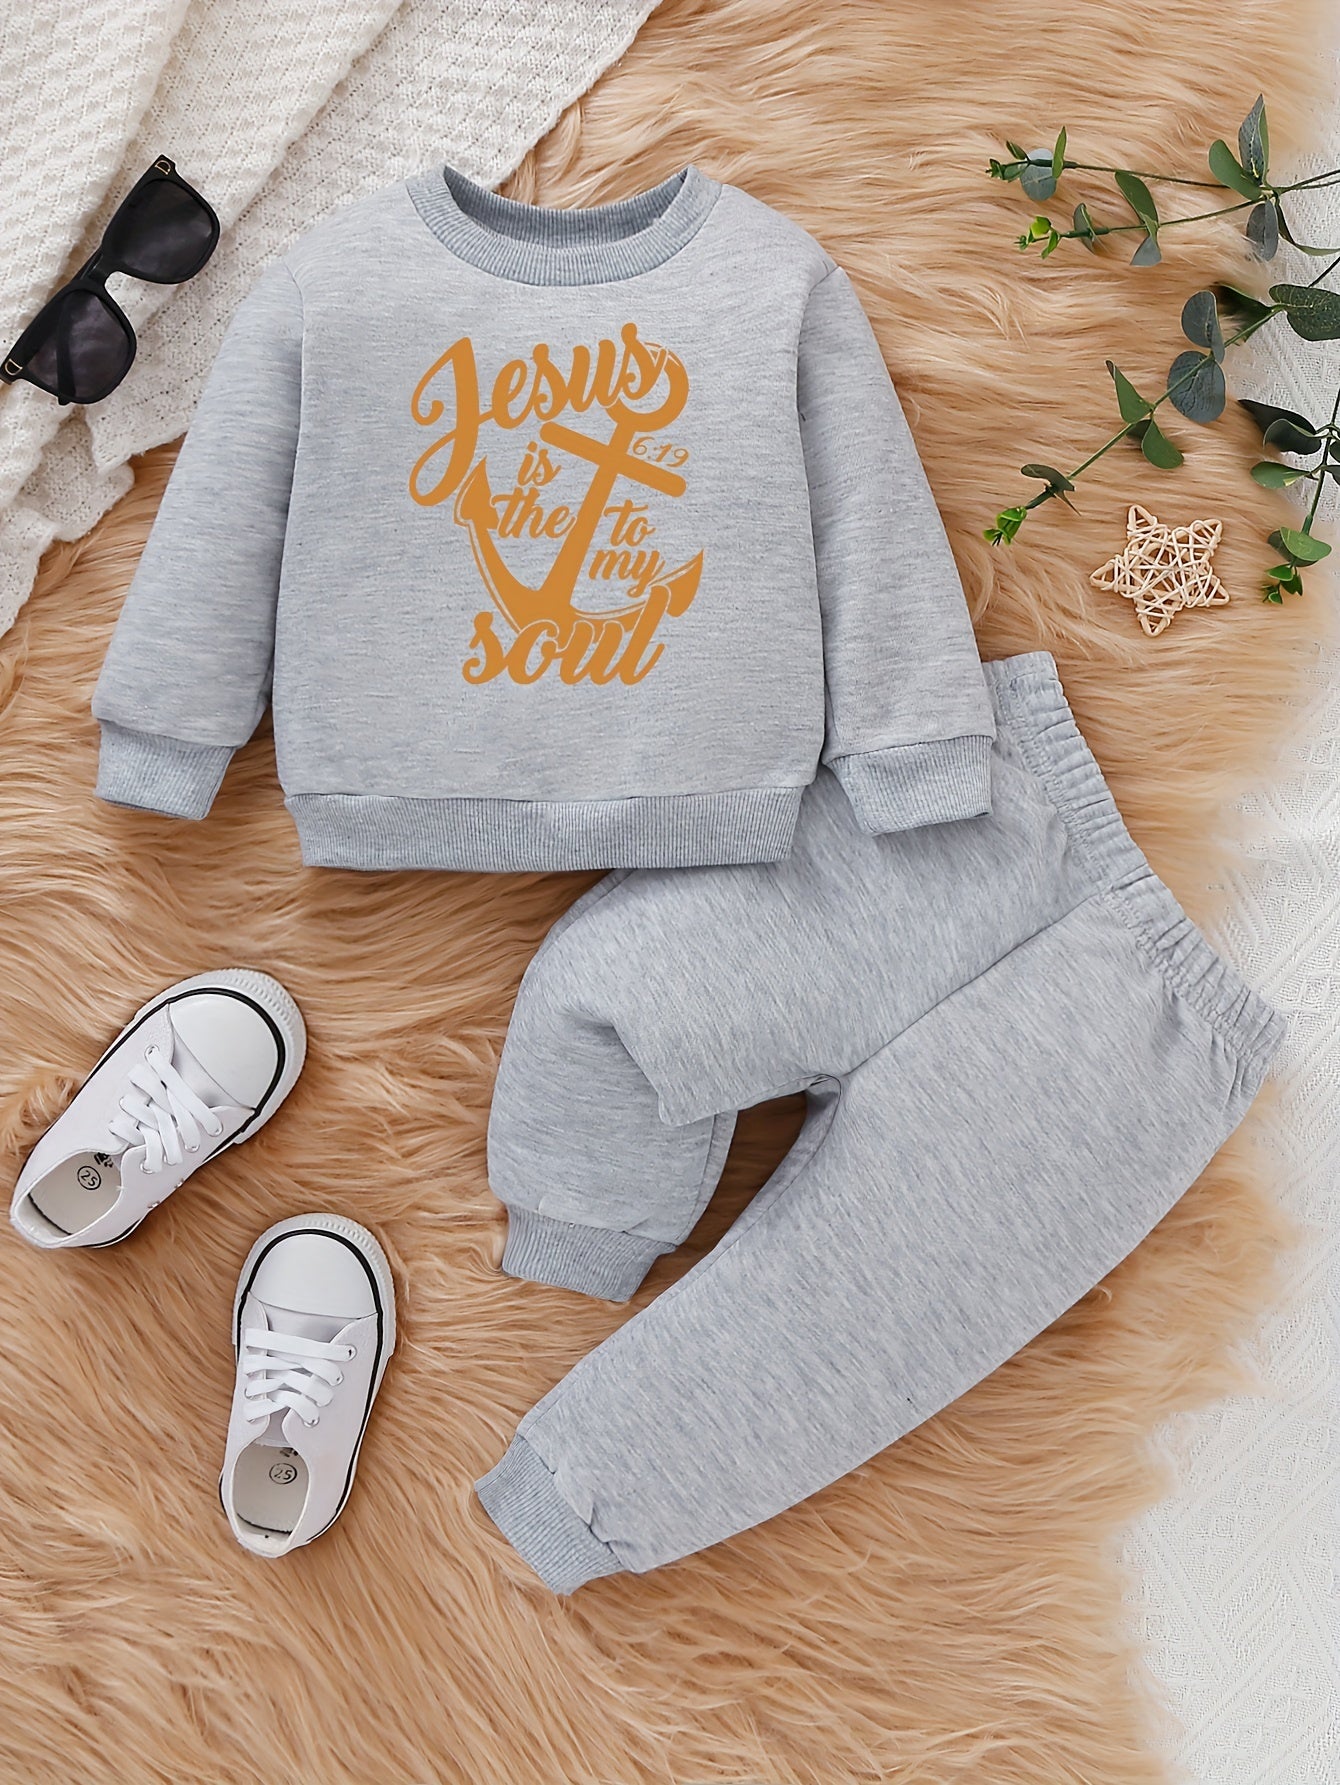 Jesus Is The Anchor To My Soul Toddler Christian Casual Outfit claimedbygoddesigns